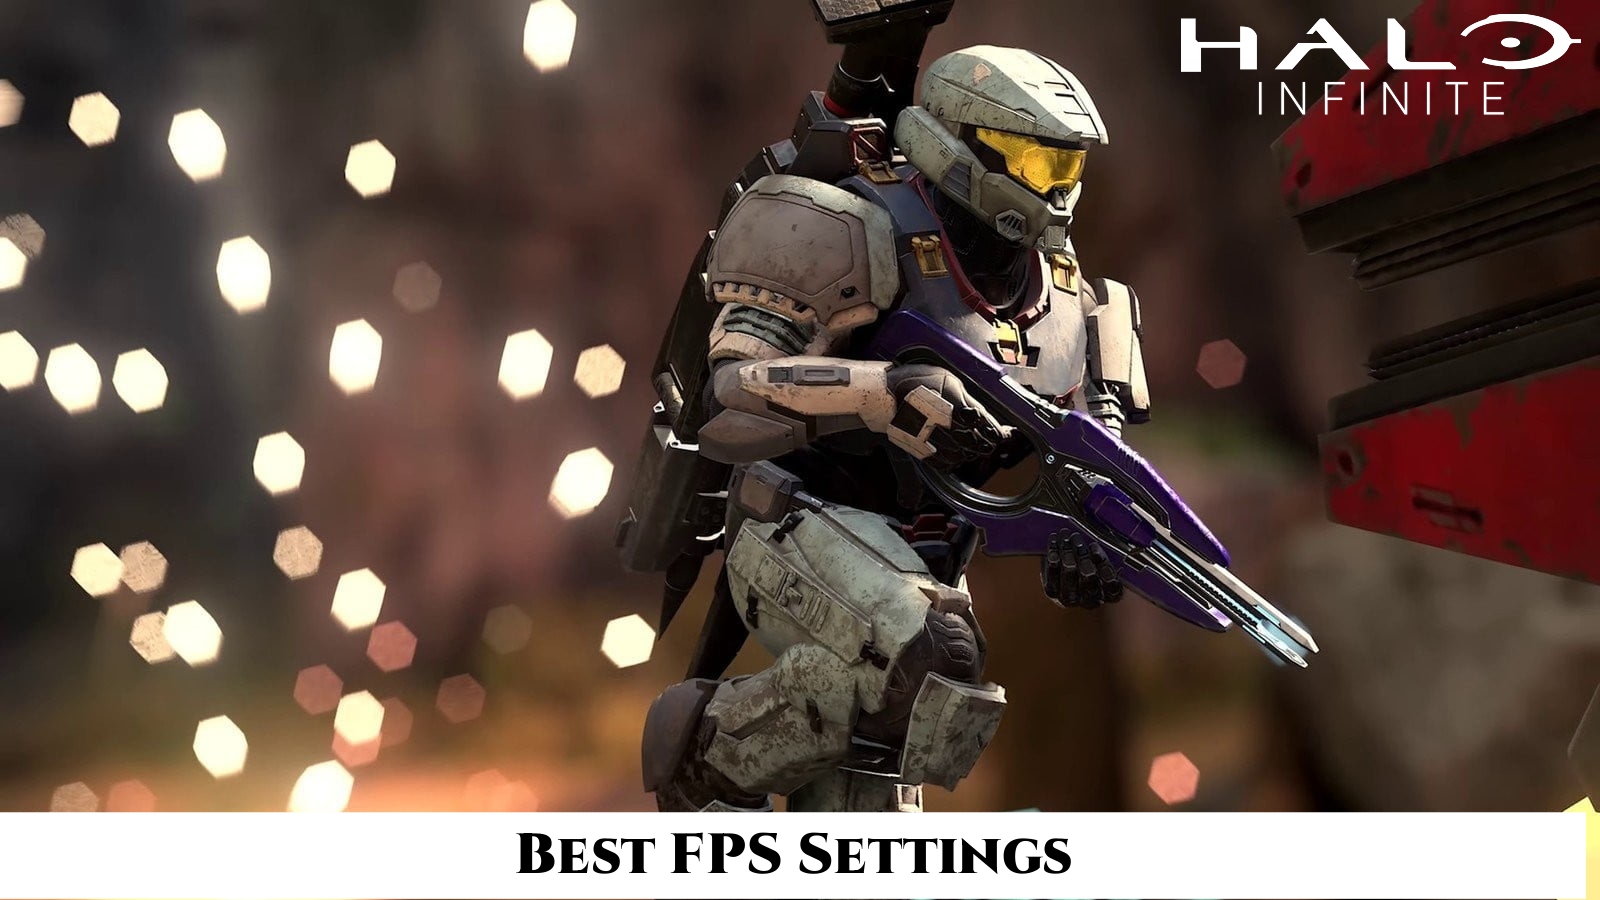 You are currently viewing Best FPS Settings For Halo Infinite